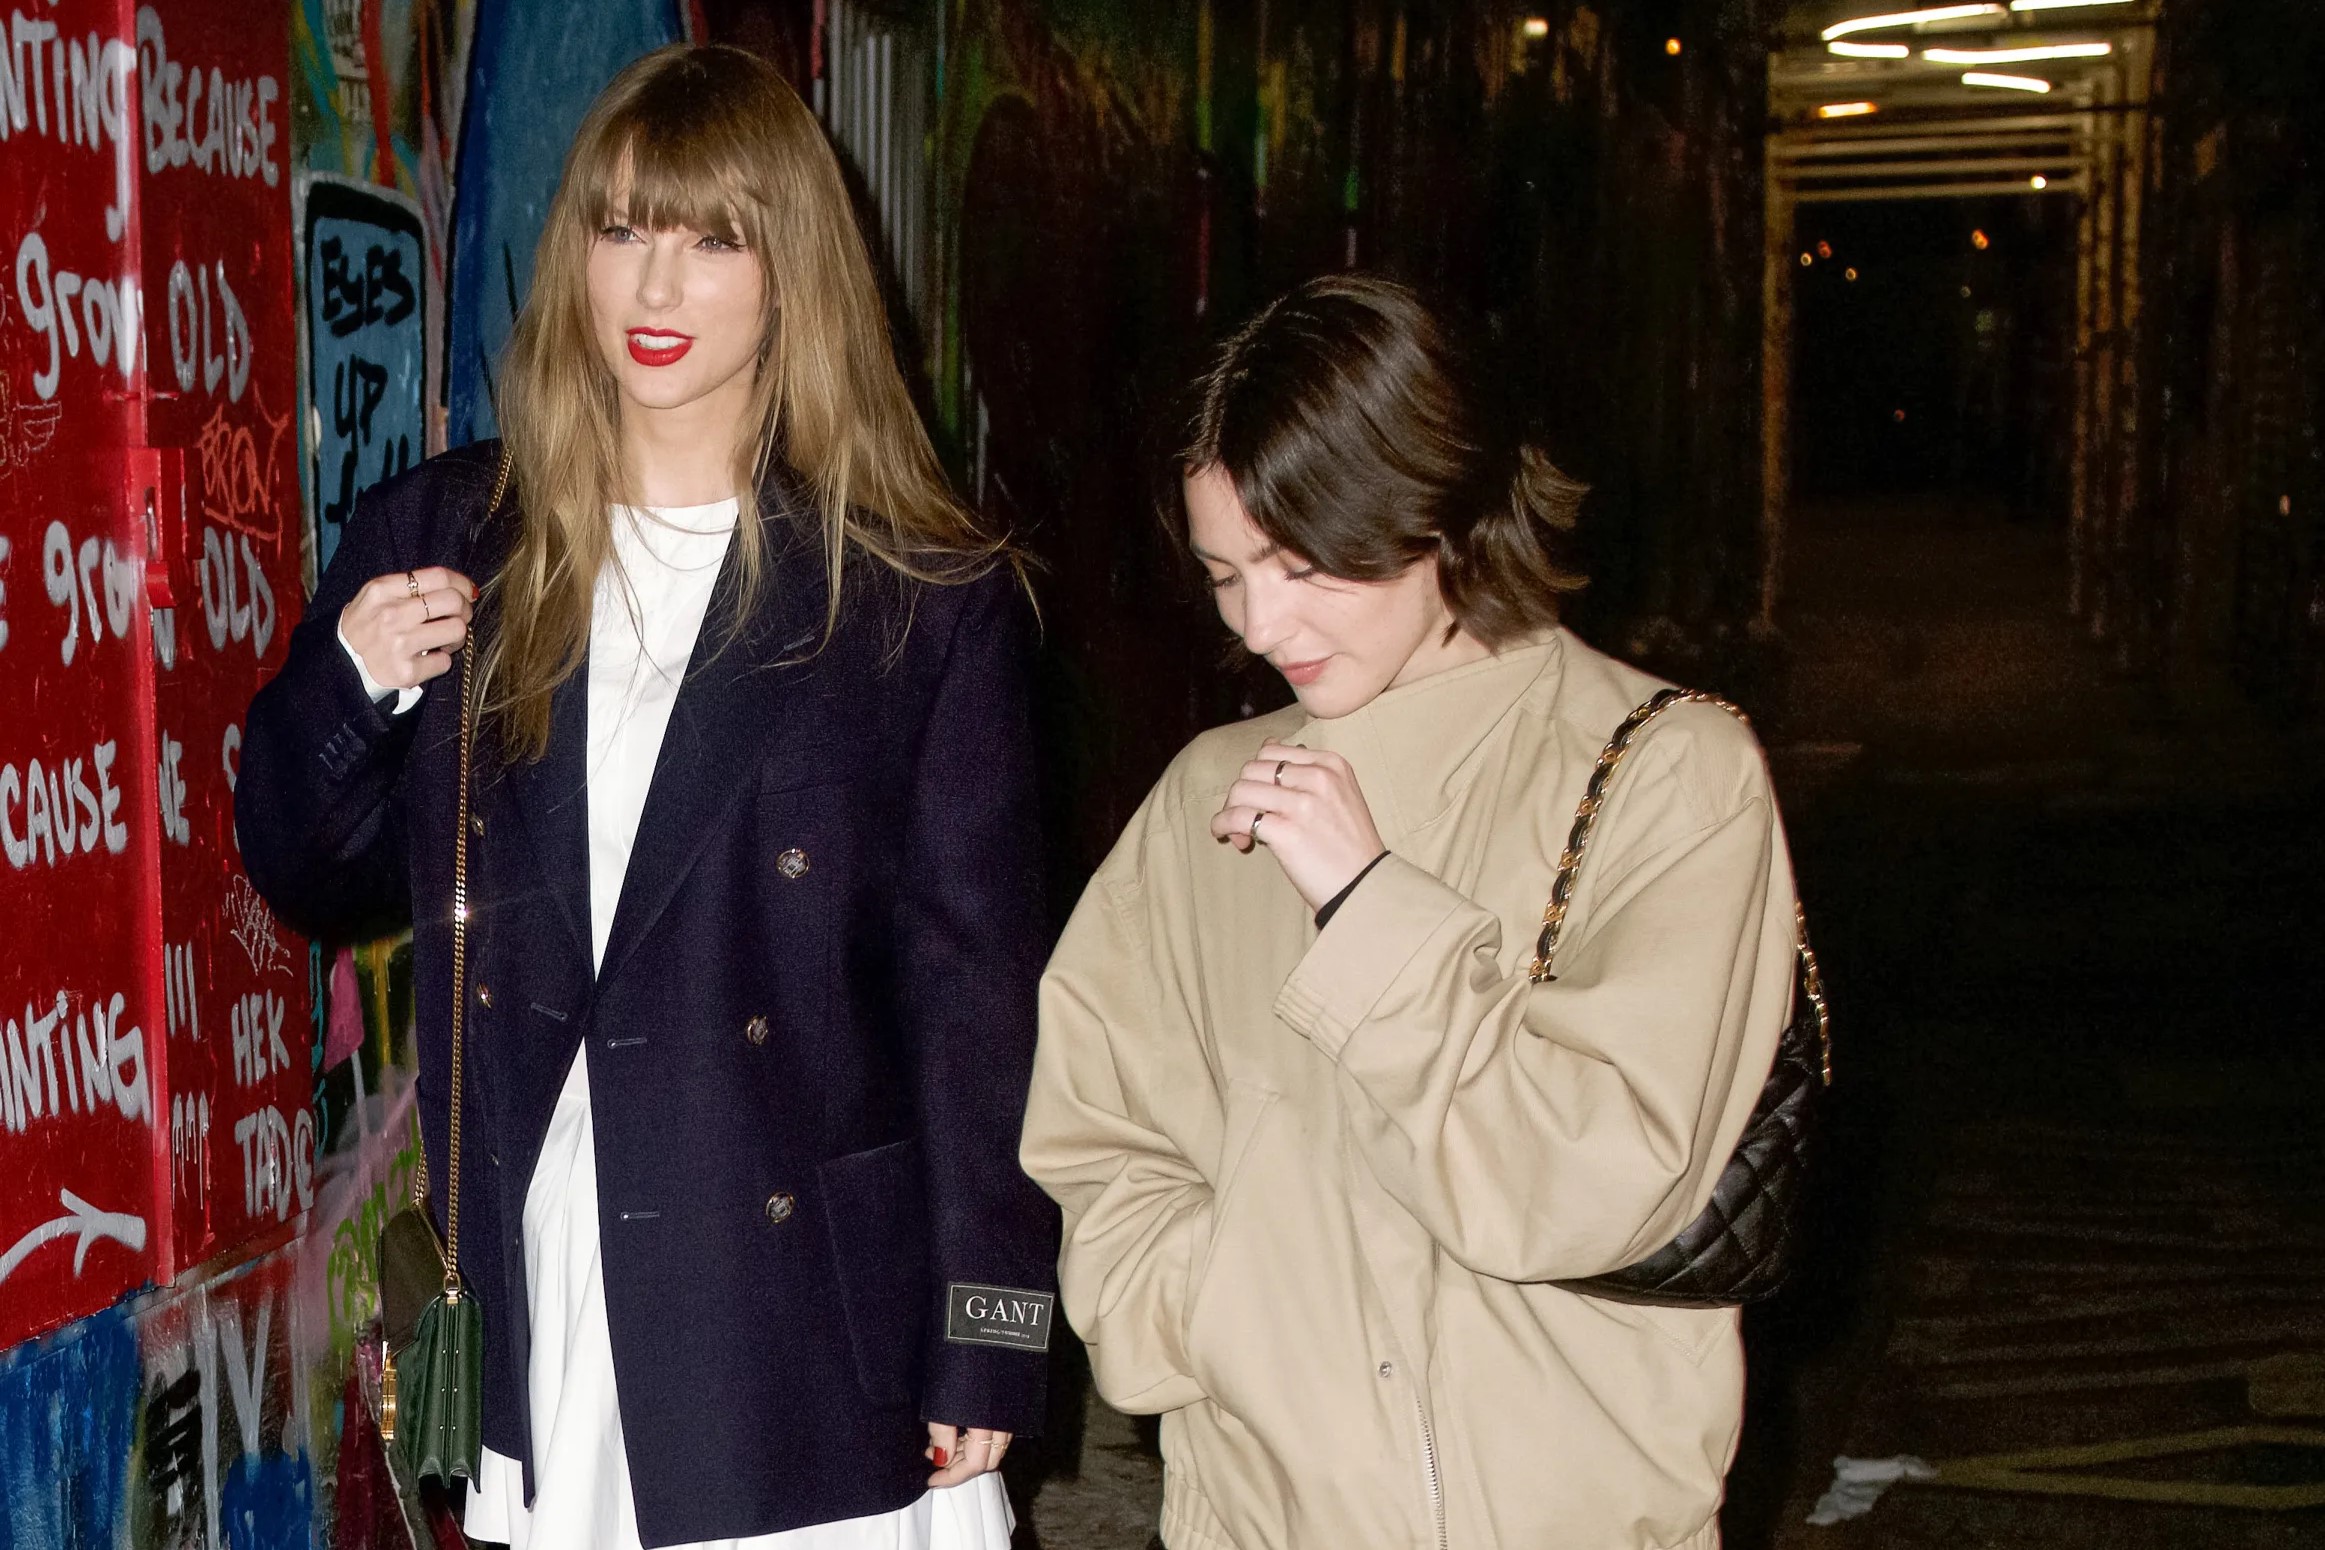 Taylor Swift Enjoys A Night Out With Friend Gracie Abrams In New York